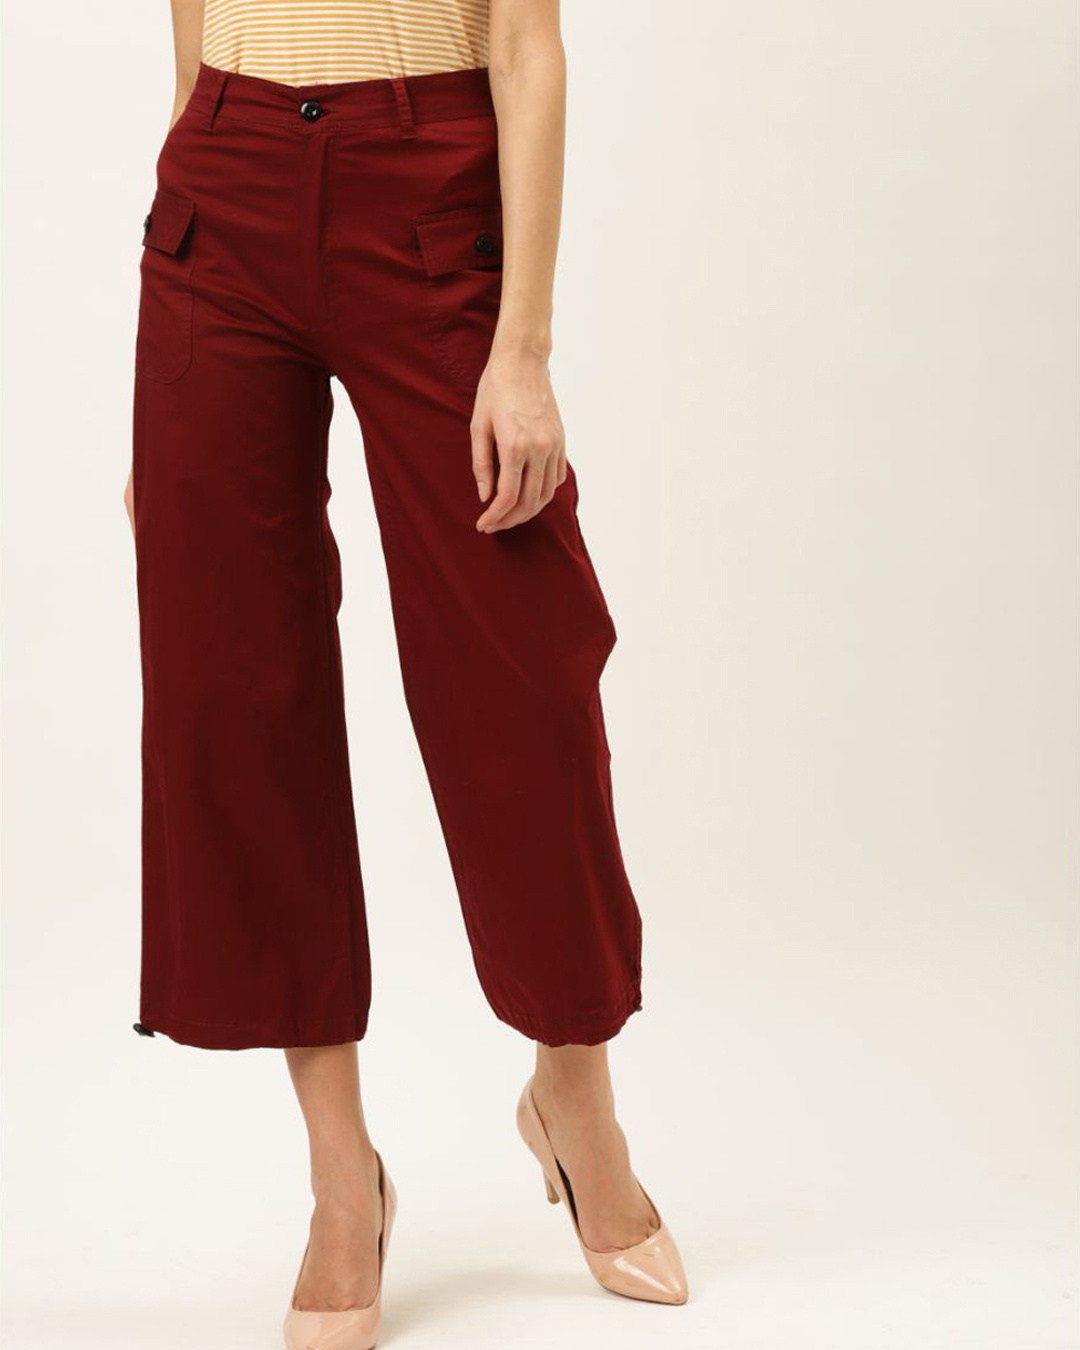 fcity.in - Cotton Blend Bootcut Parallel Trouser Pants For Women Regular Fit-cheohanoi.vn